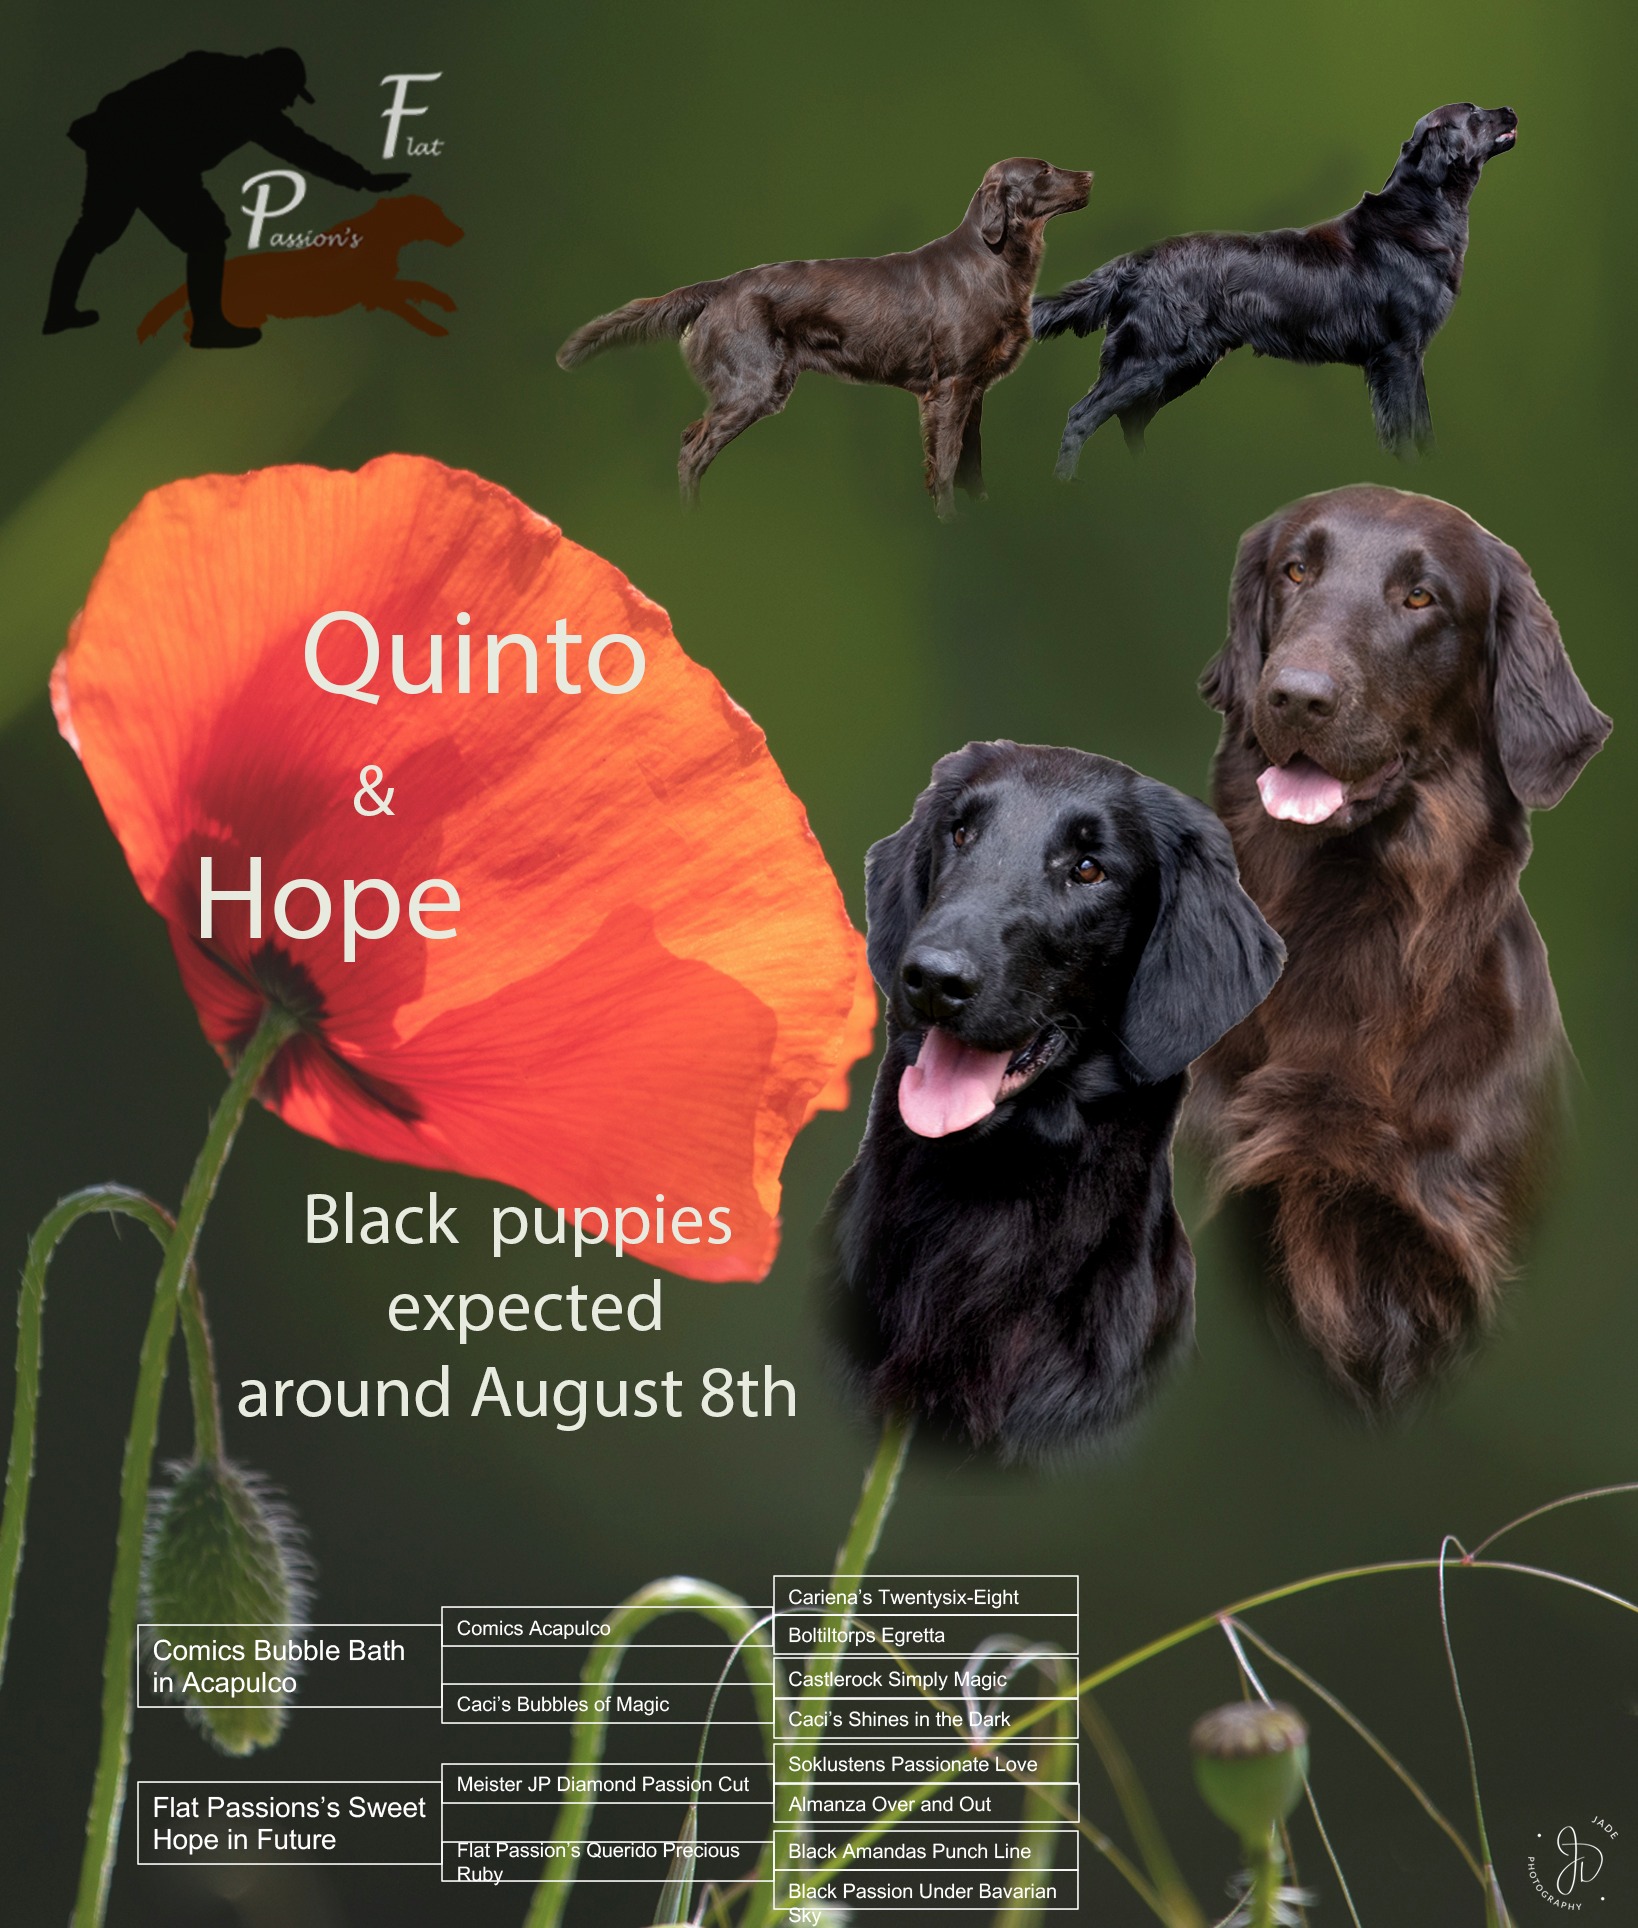 Hope is in whelp, black puppies are expected around August 8th